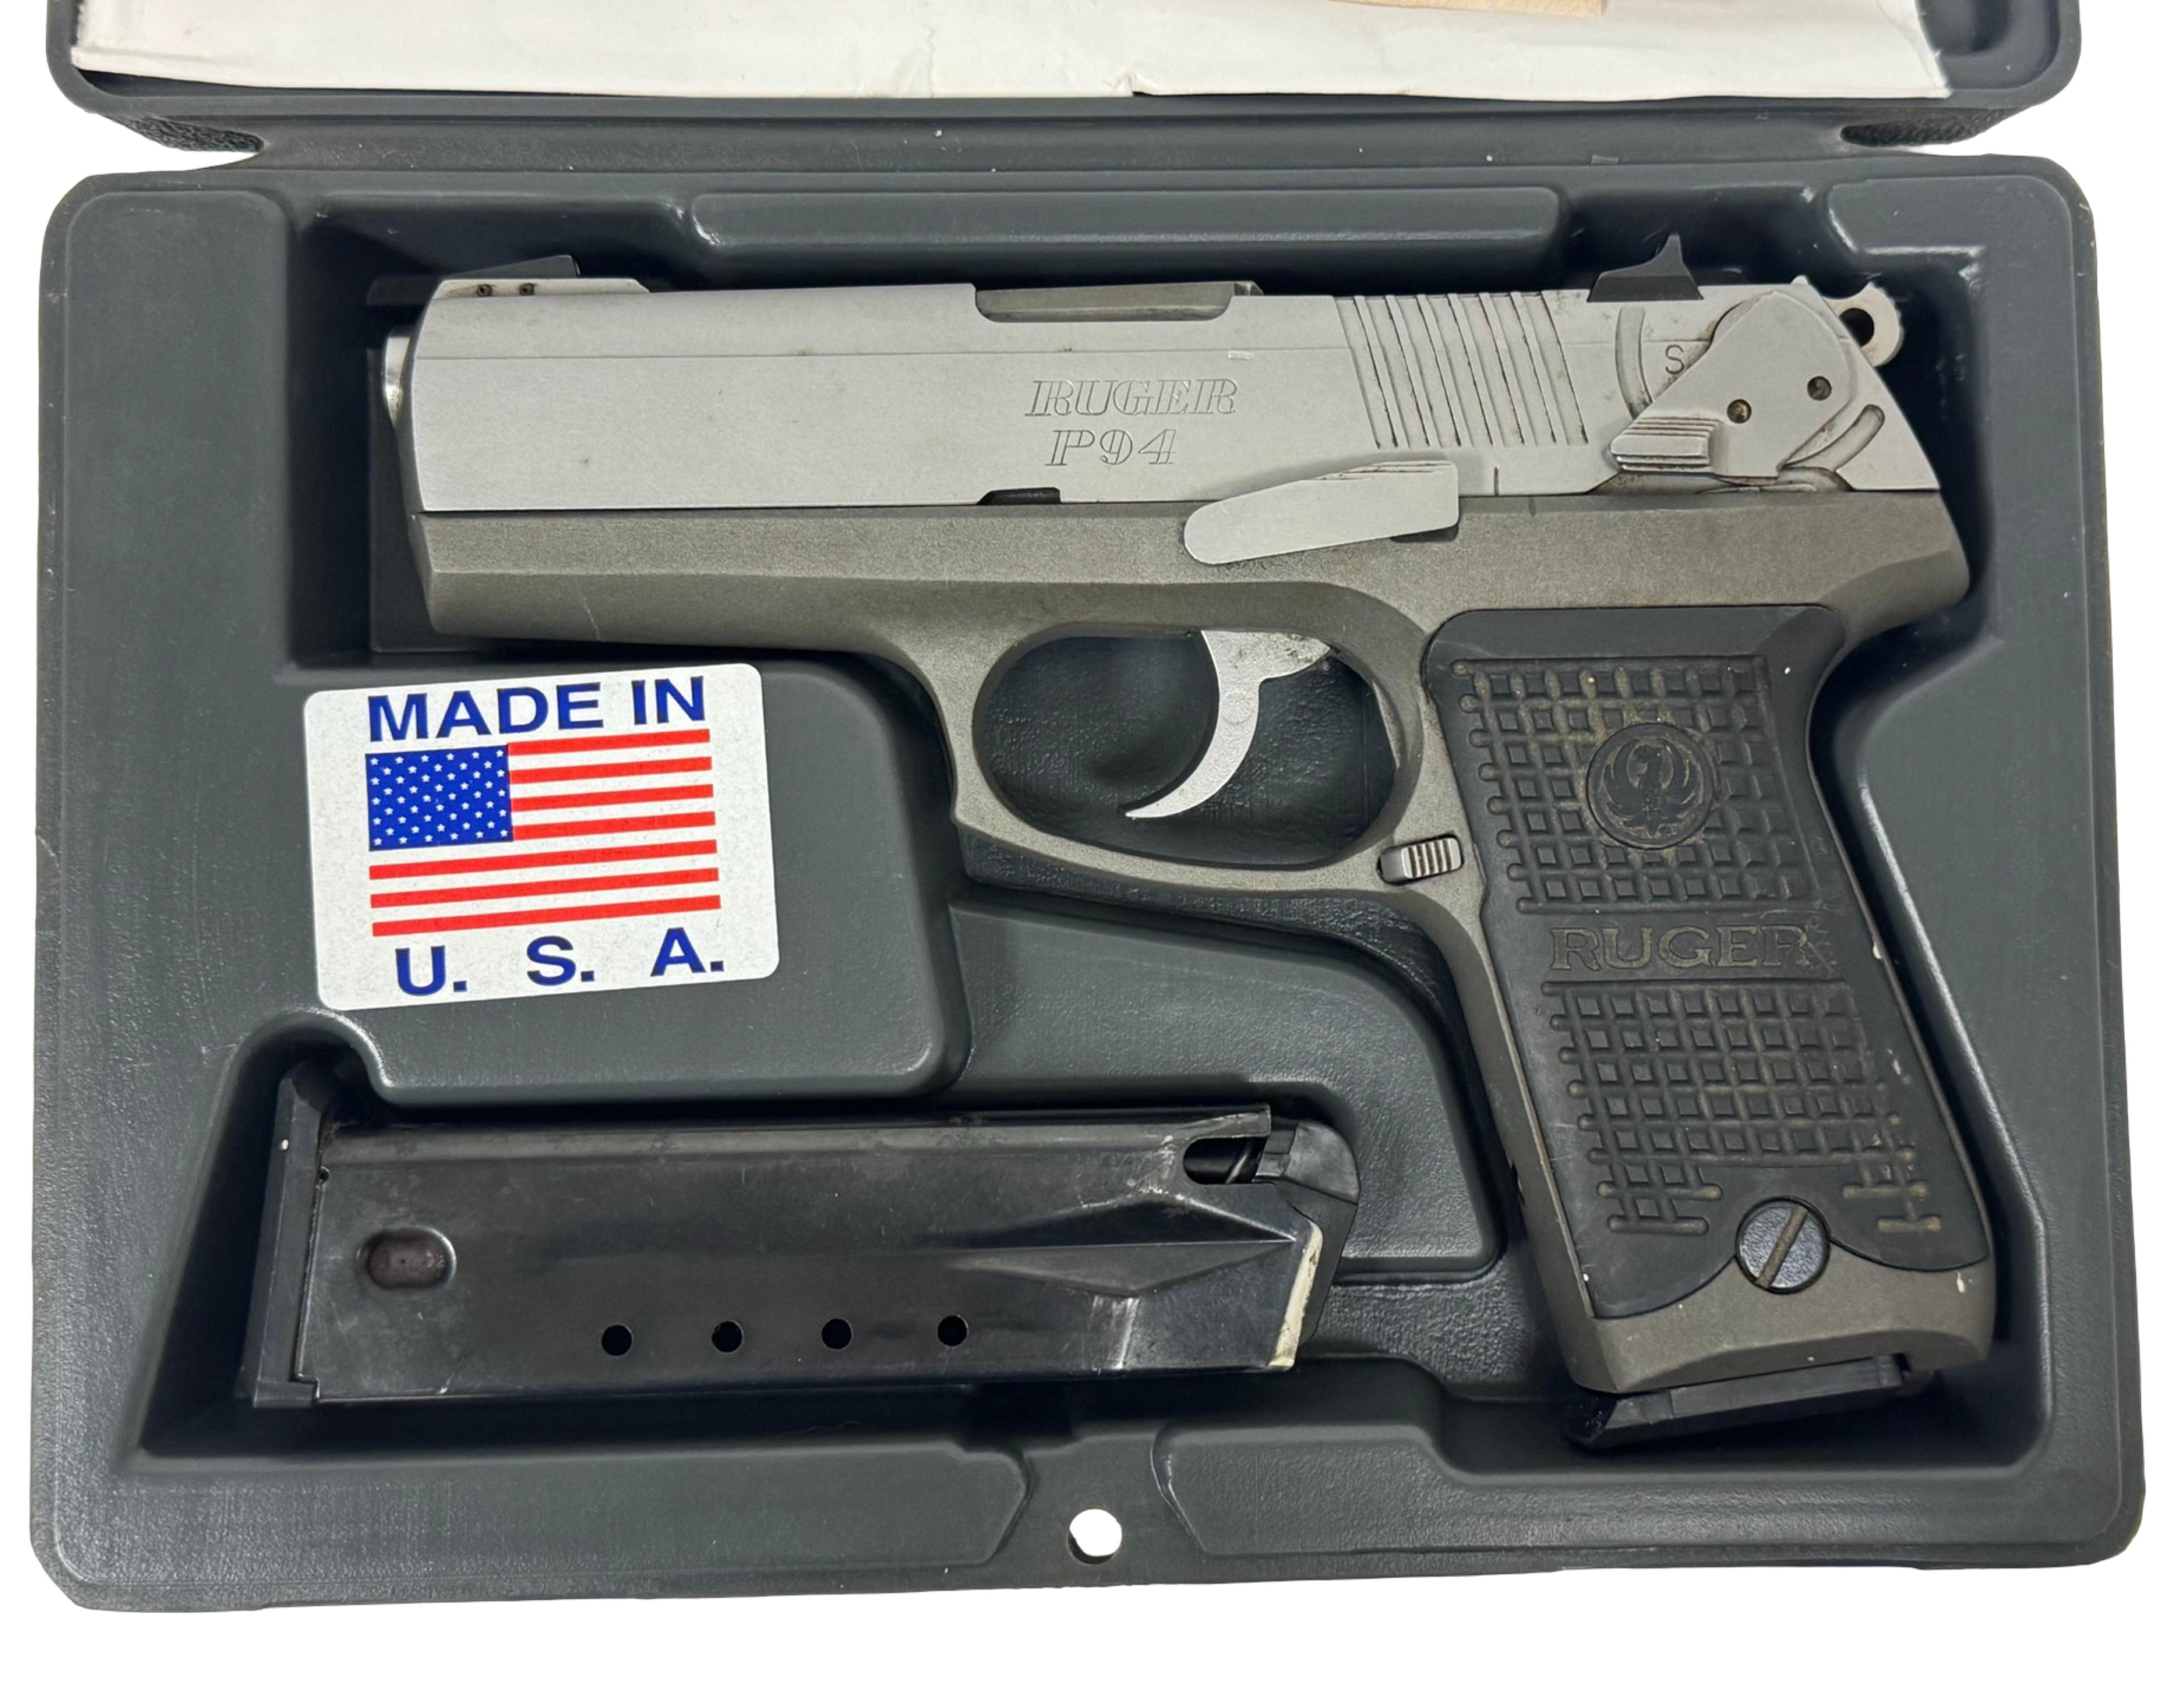 Ruger P94 Semi-Automatic .40 SMITH & WESSON Pistol in Factory Box